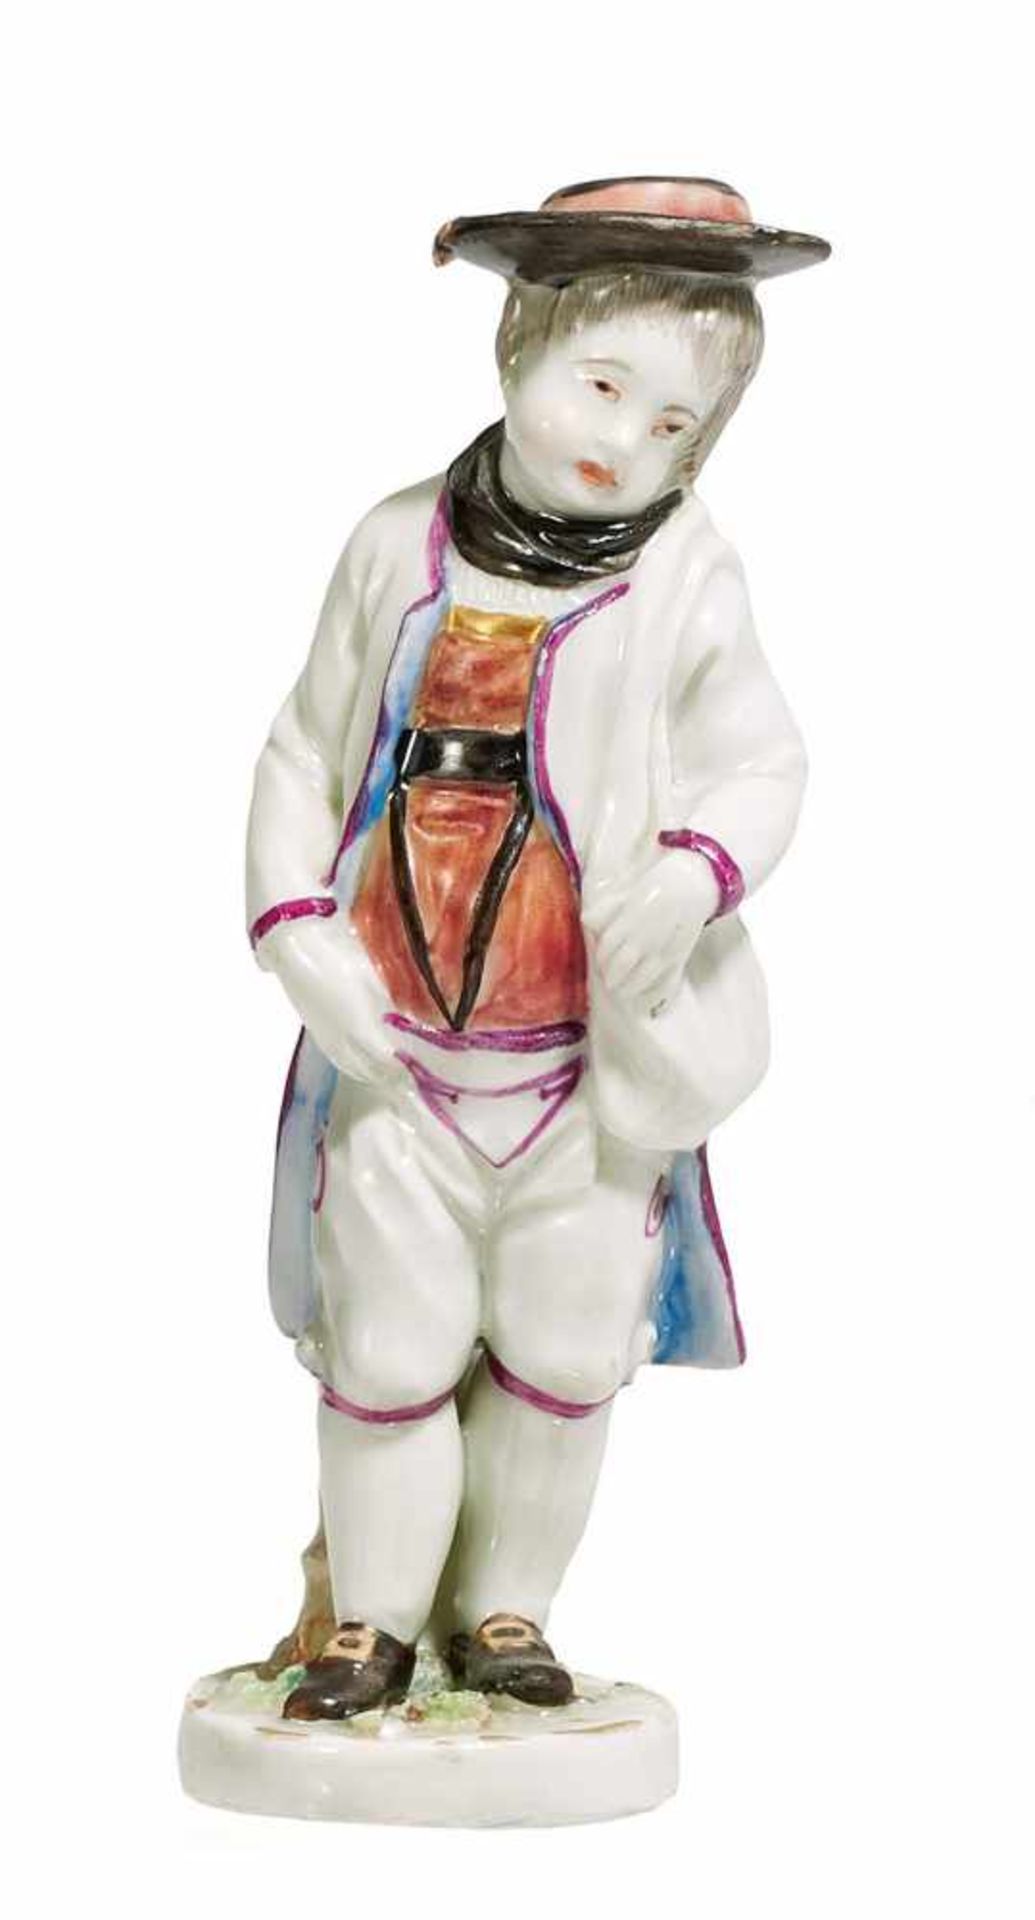 SMALL PORCELAIN FIGURE OF A BOY IN TRADITIONAL DRESS WITH SHOULDER BAG.